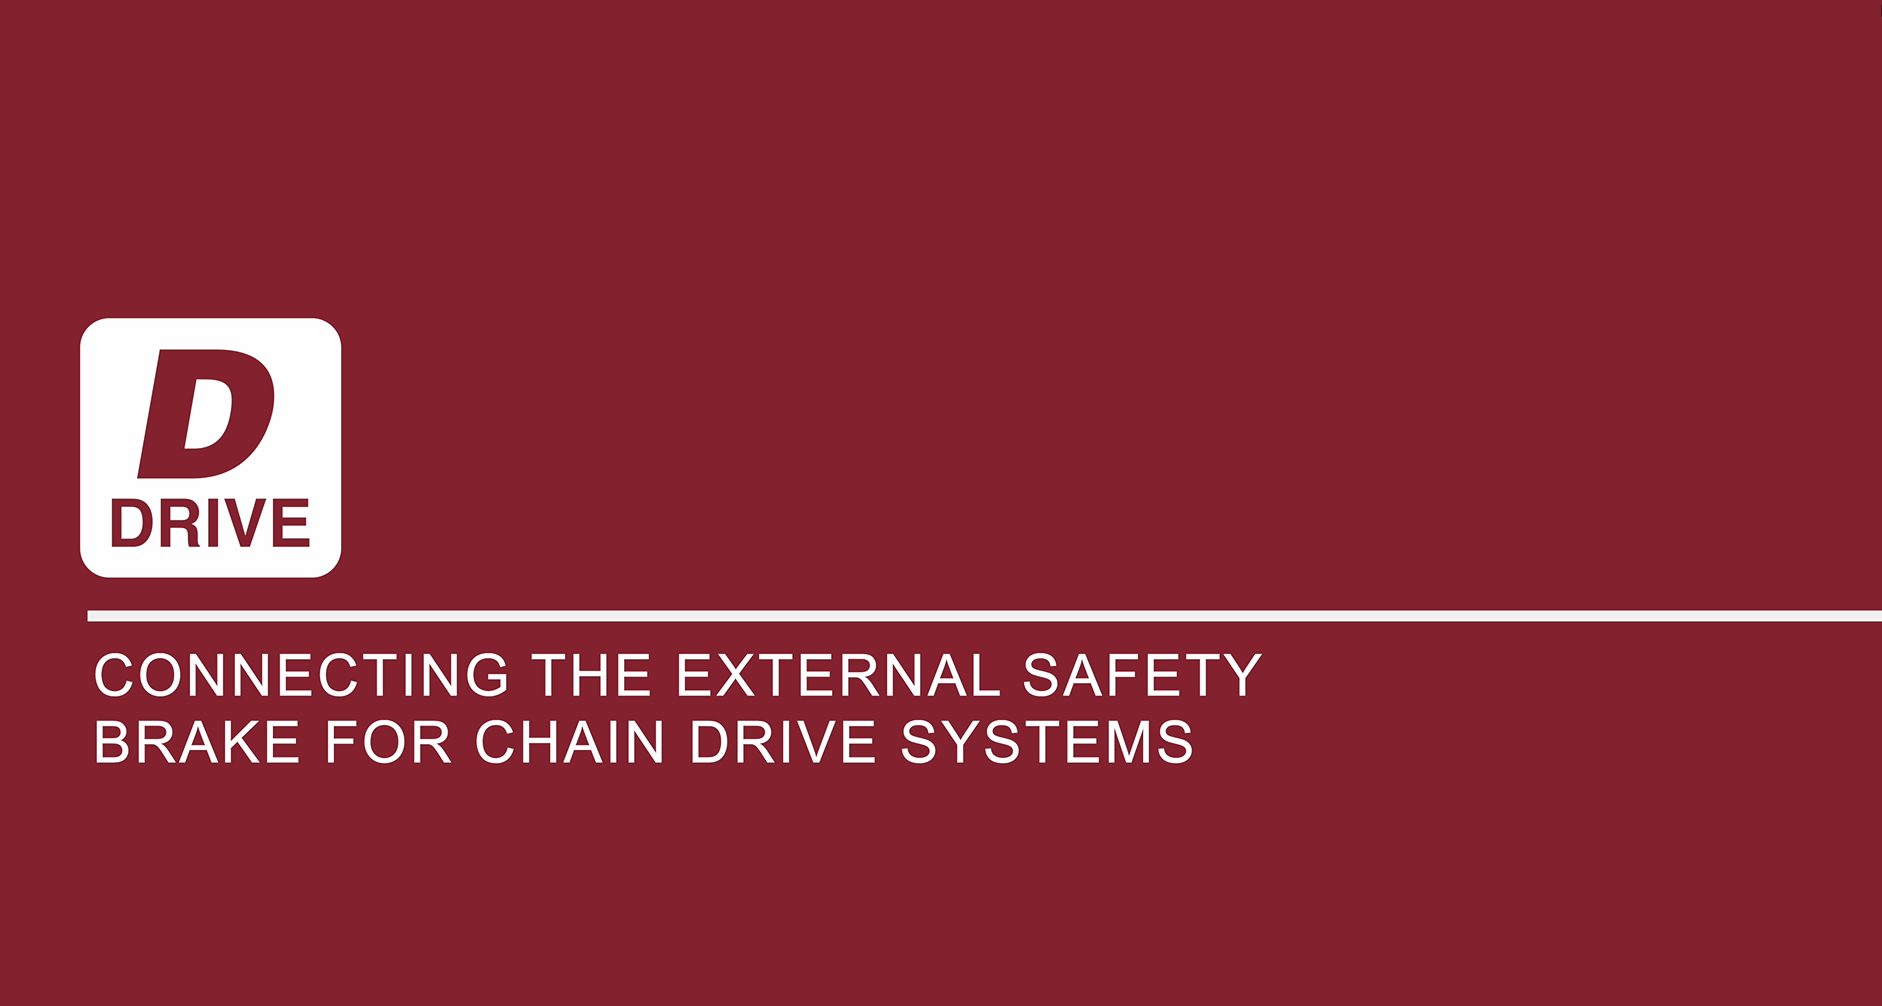 Connecting the external safety brake for chain drive systems